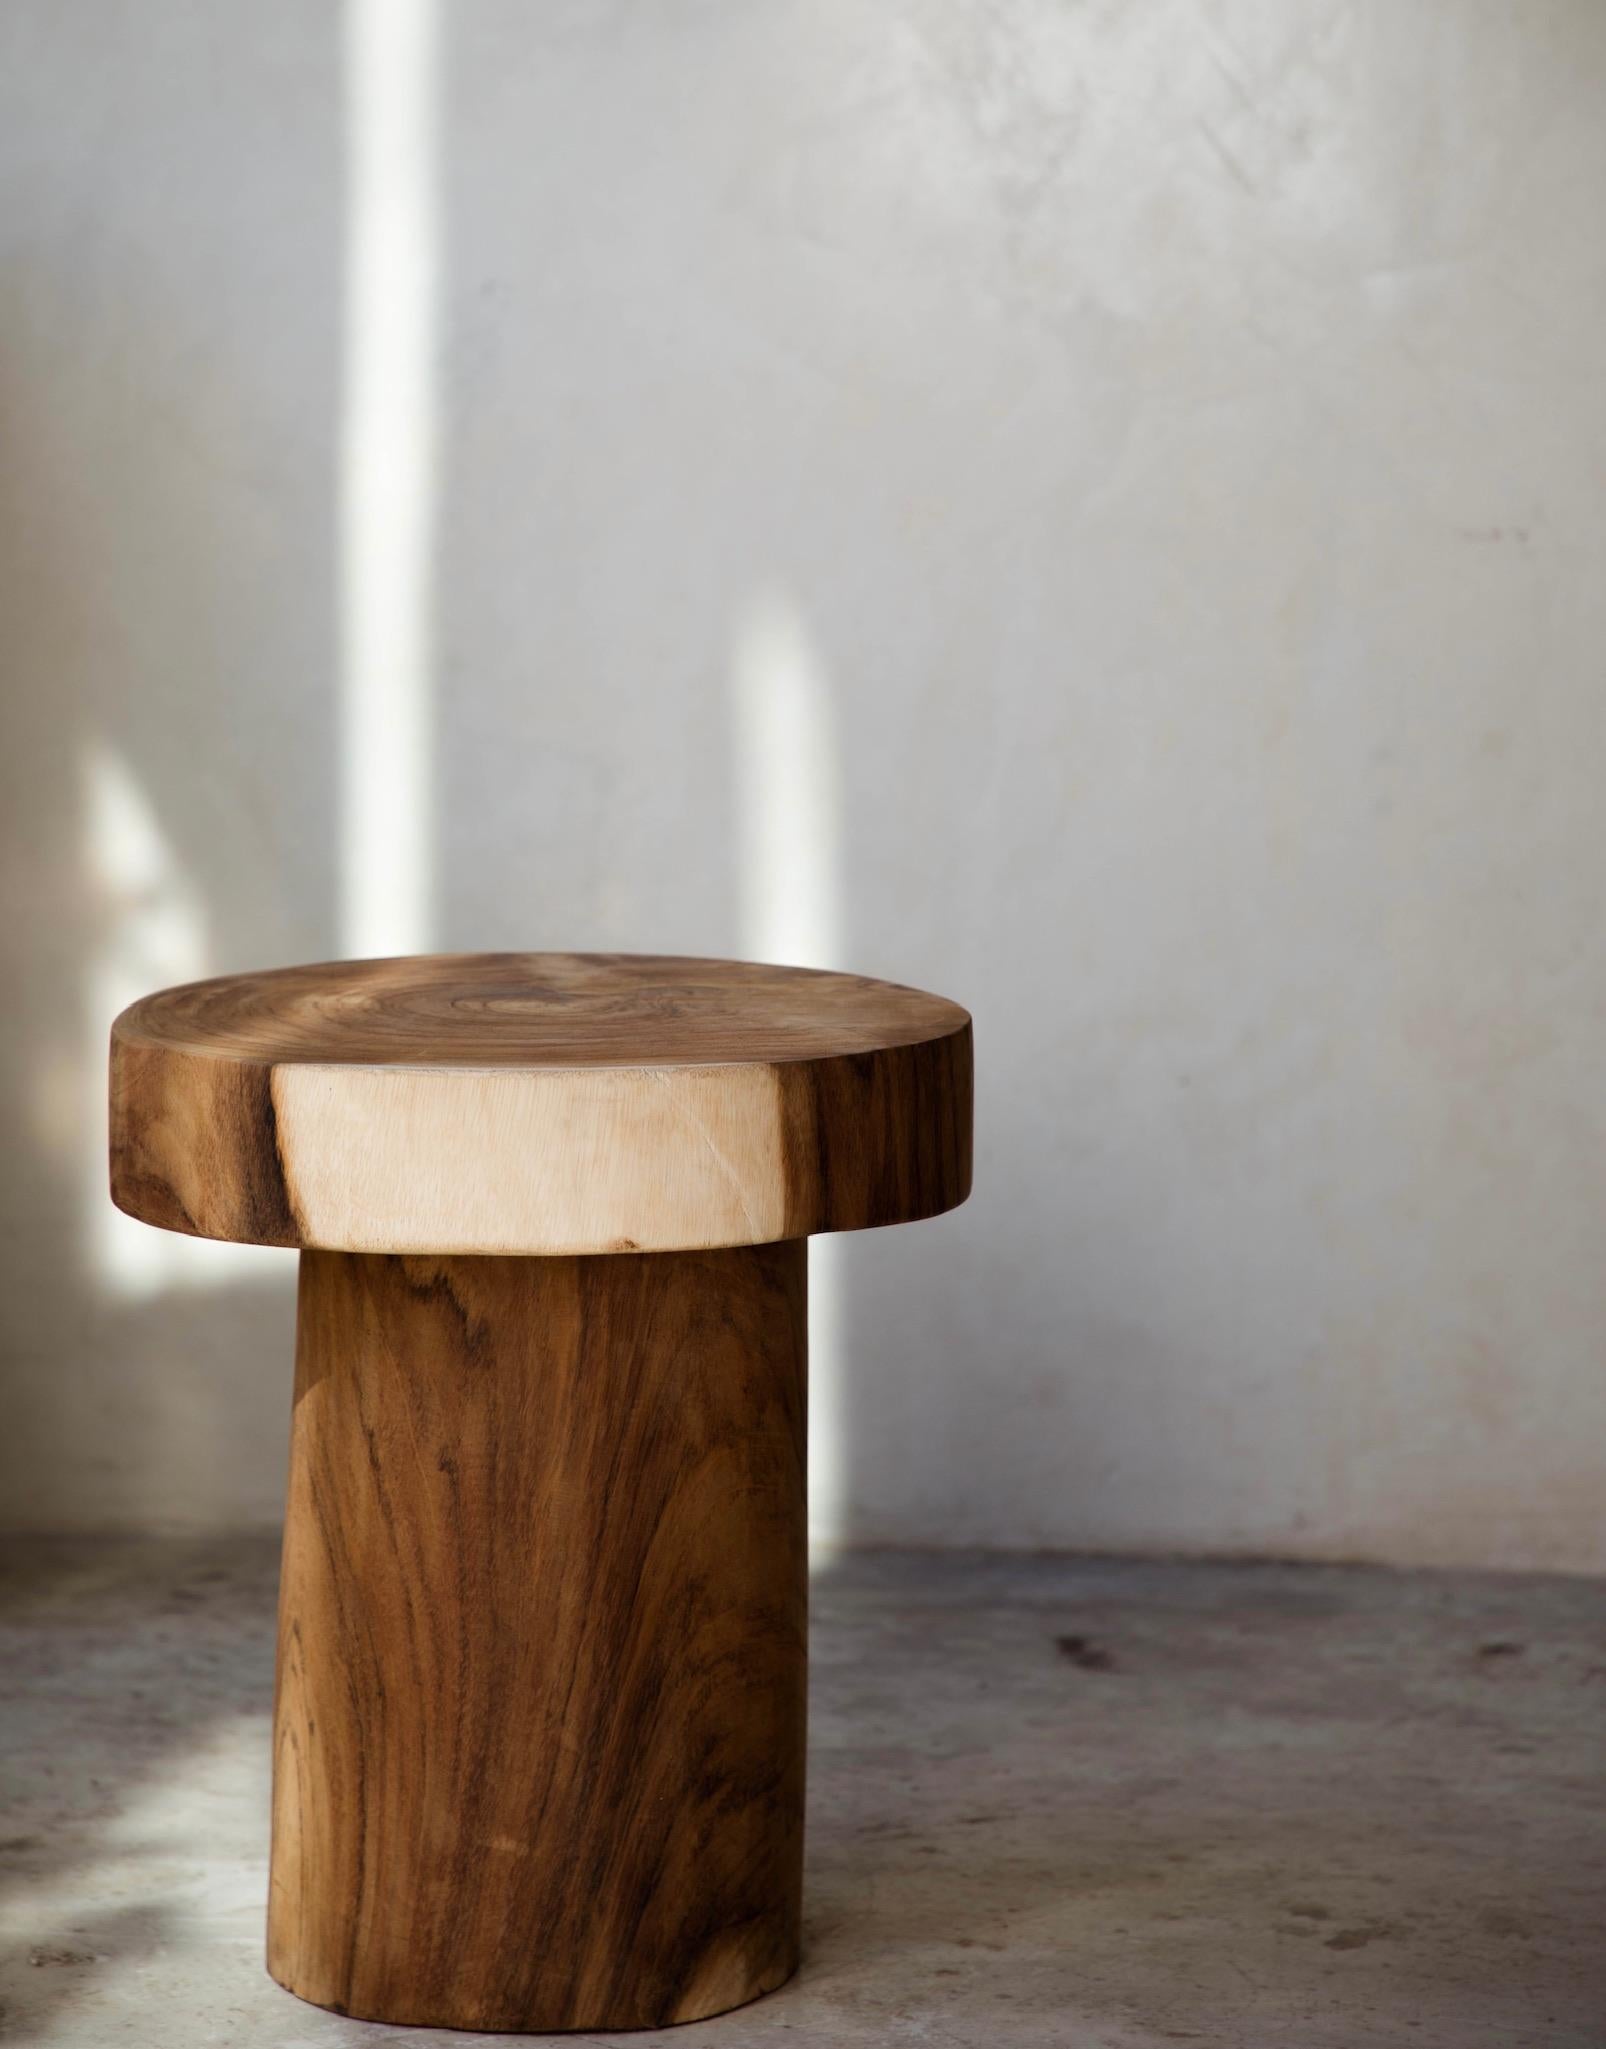 Natural parota totem by Daniel Orozco.
Material: parota wood.
Dimensions: D 35 x H 45 cm

Daniel Orozco Estudio.
We are an inclusive interior design estudio, who love to work with fabrics and natural textiles in makes our spaces sophisticated